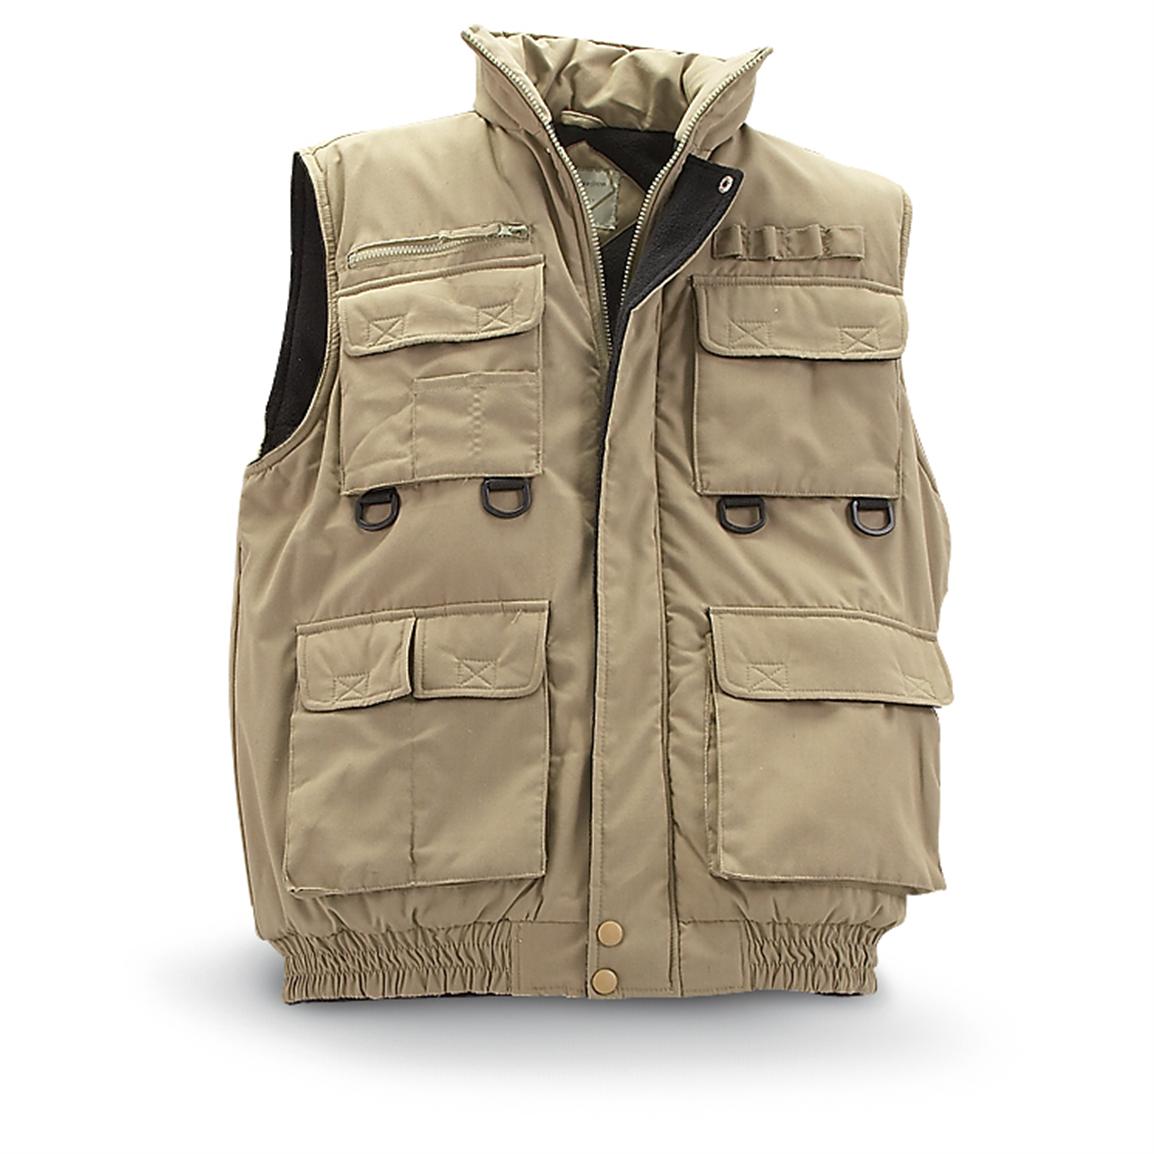 Fleece - lined Insulated Outdoor Vest - 185829, Vests at Sportsman's Guide